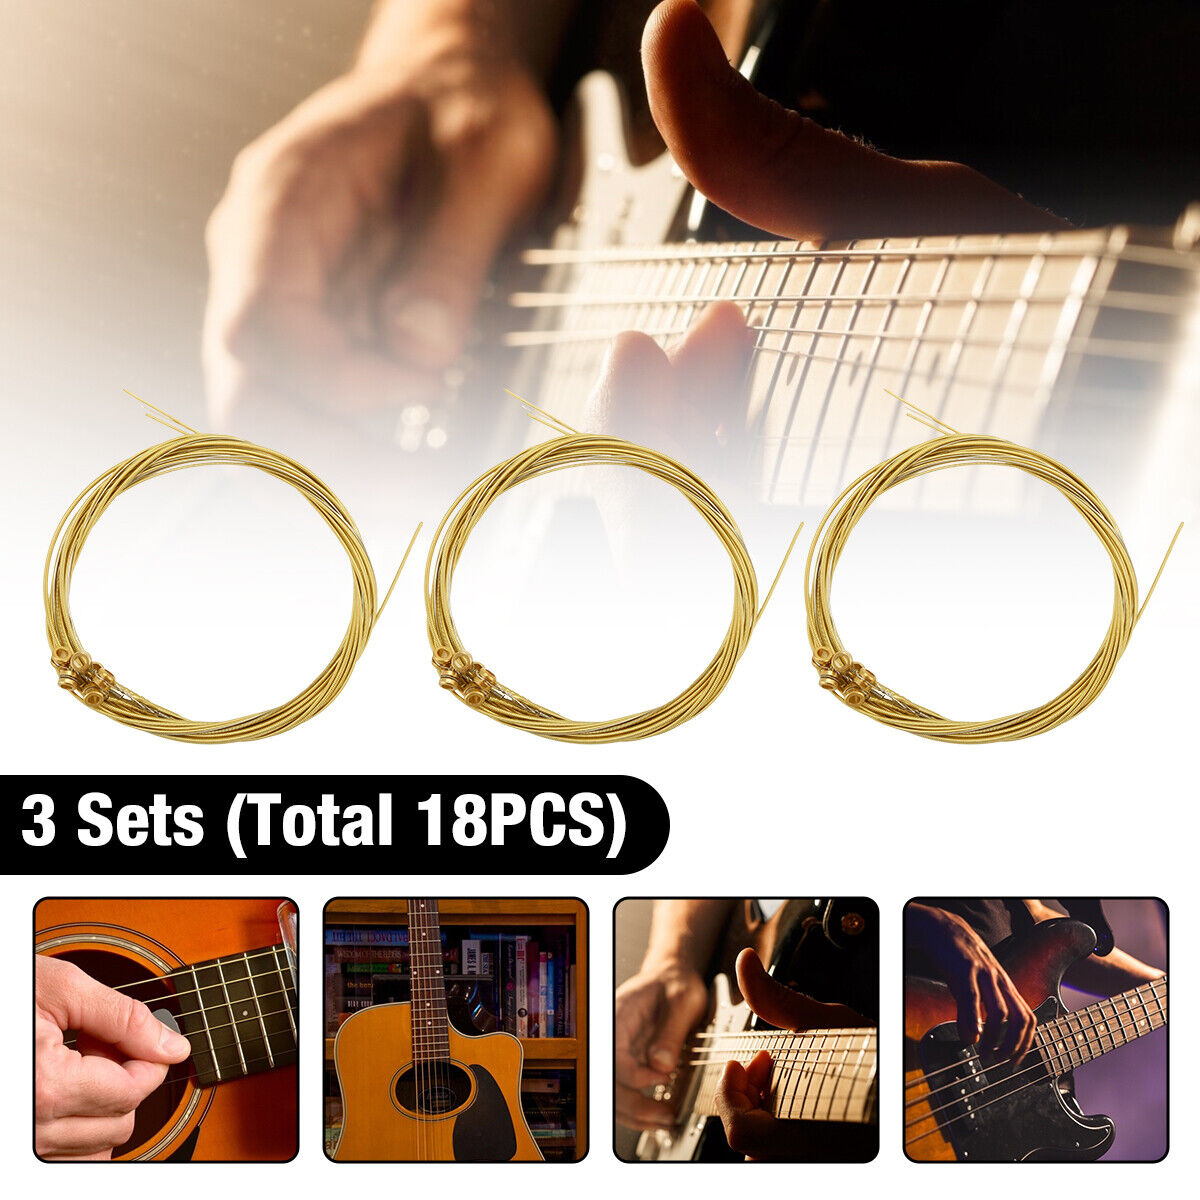 3 Sets of 6 Guitar Strings Replacement Steel String for Electric Acoustic Guitar Unbranded - фотография #8